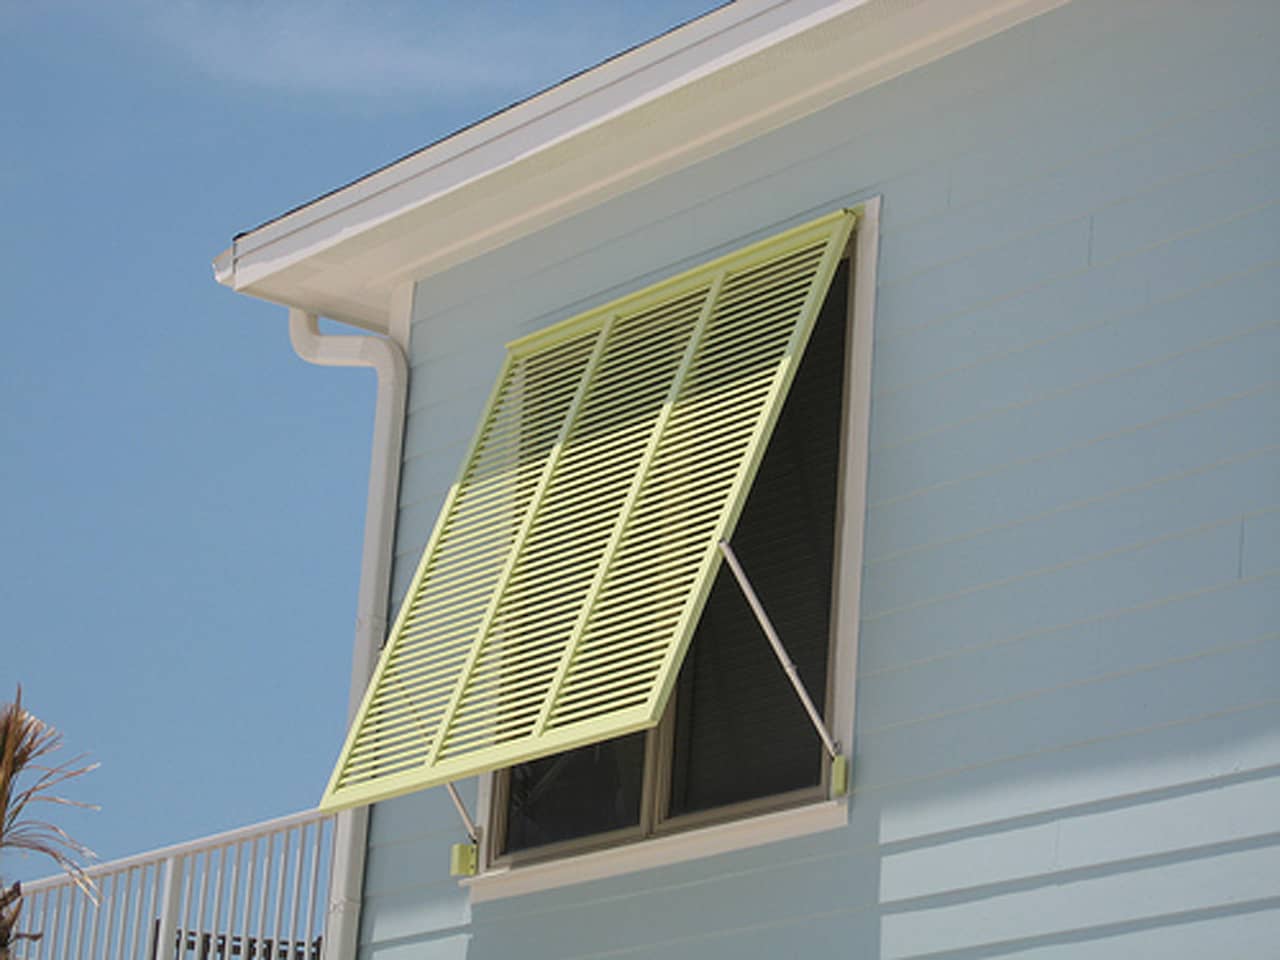 Bright green Bahama shutters on a house